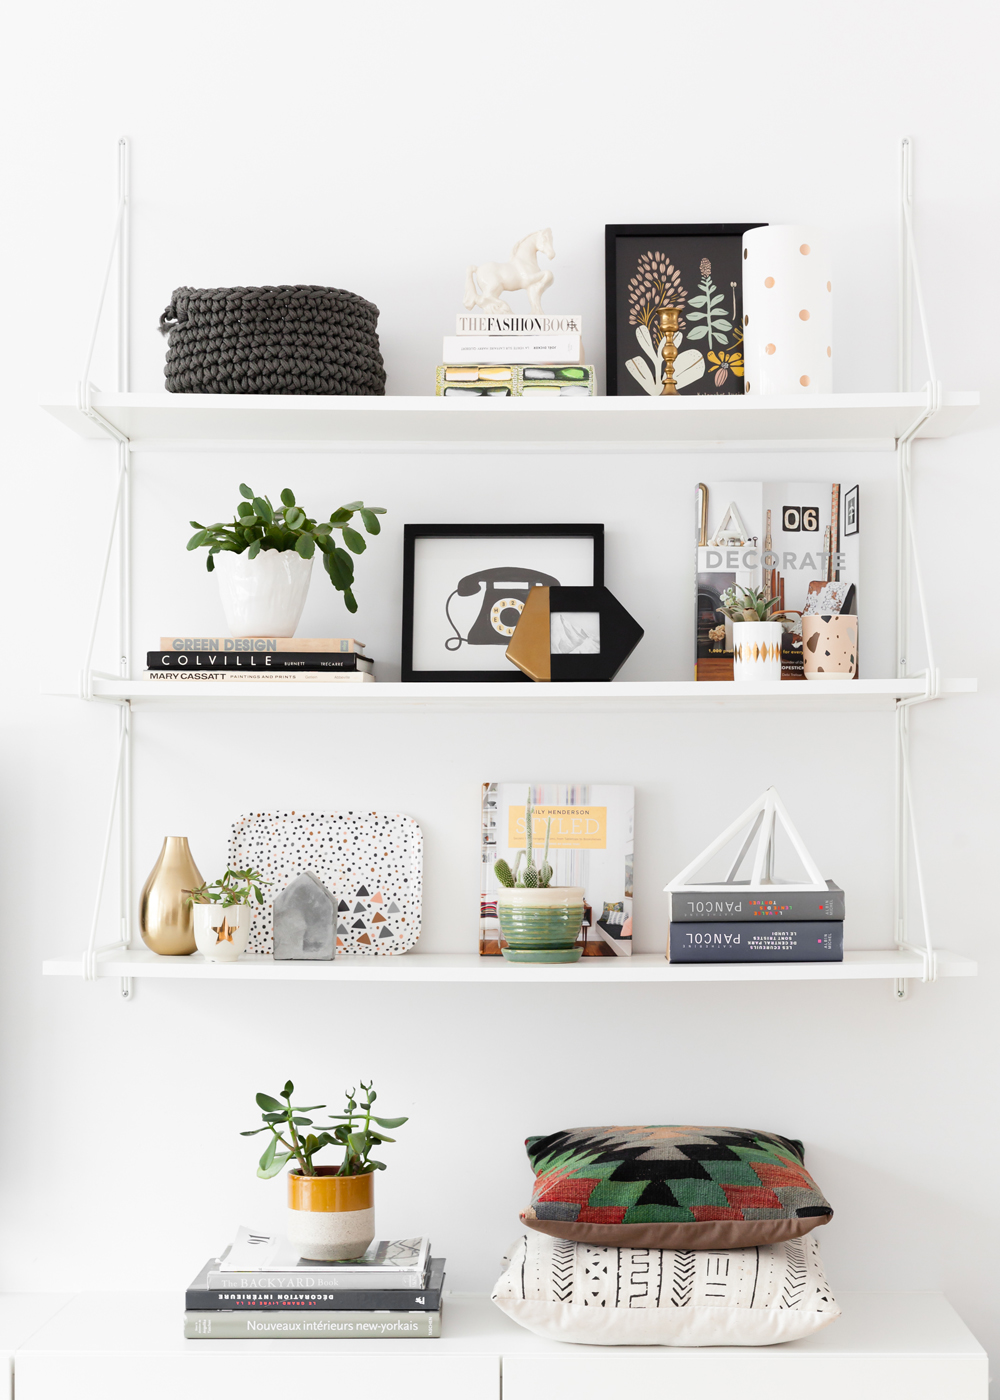 three white shelves with grey nubby knit basket and fashion book on top shelf